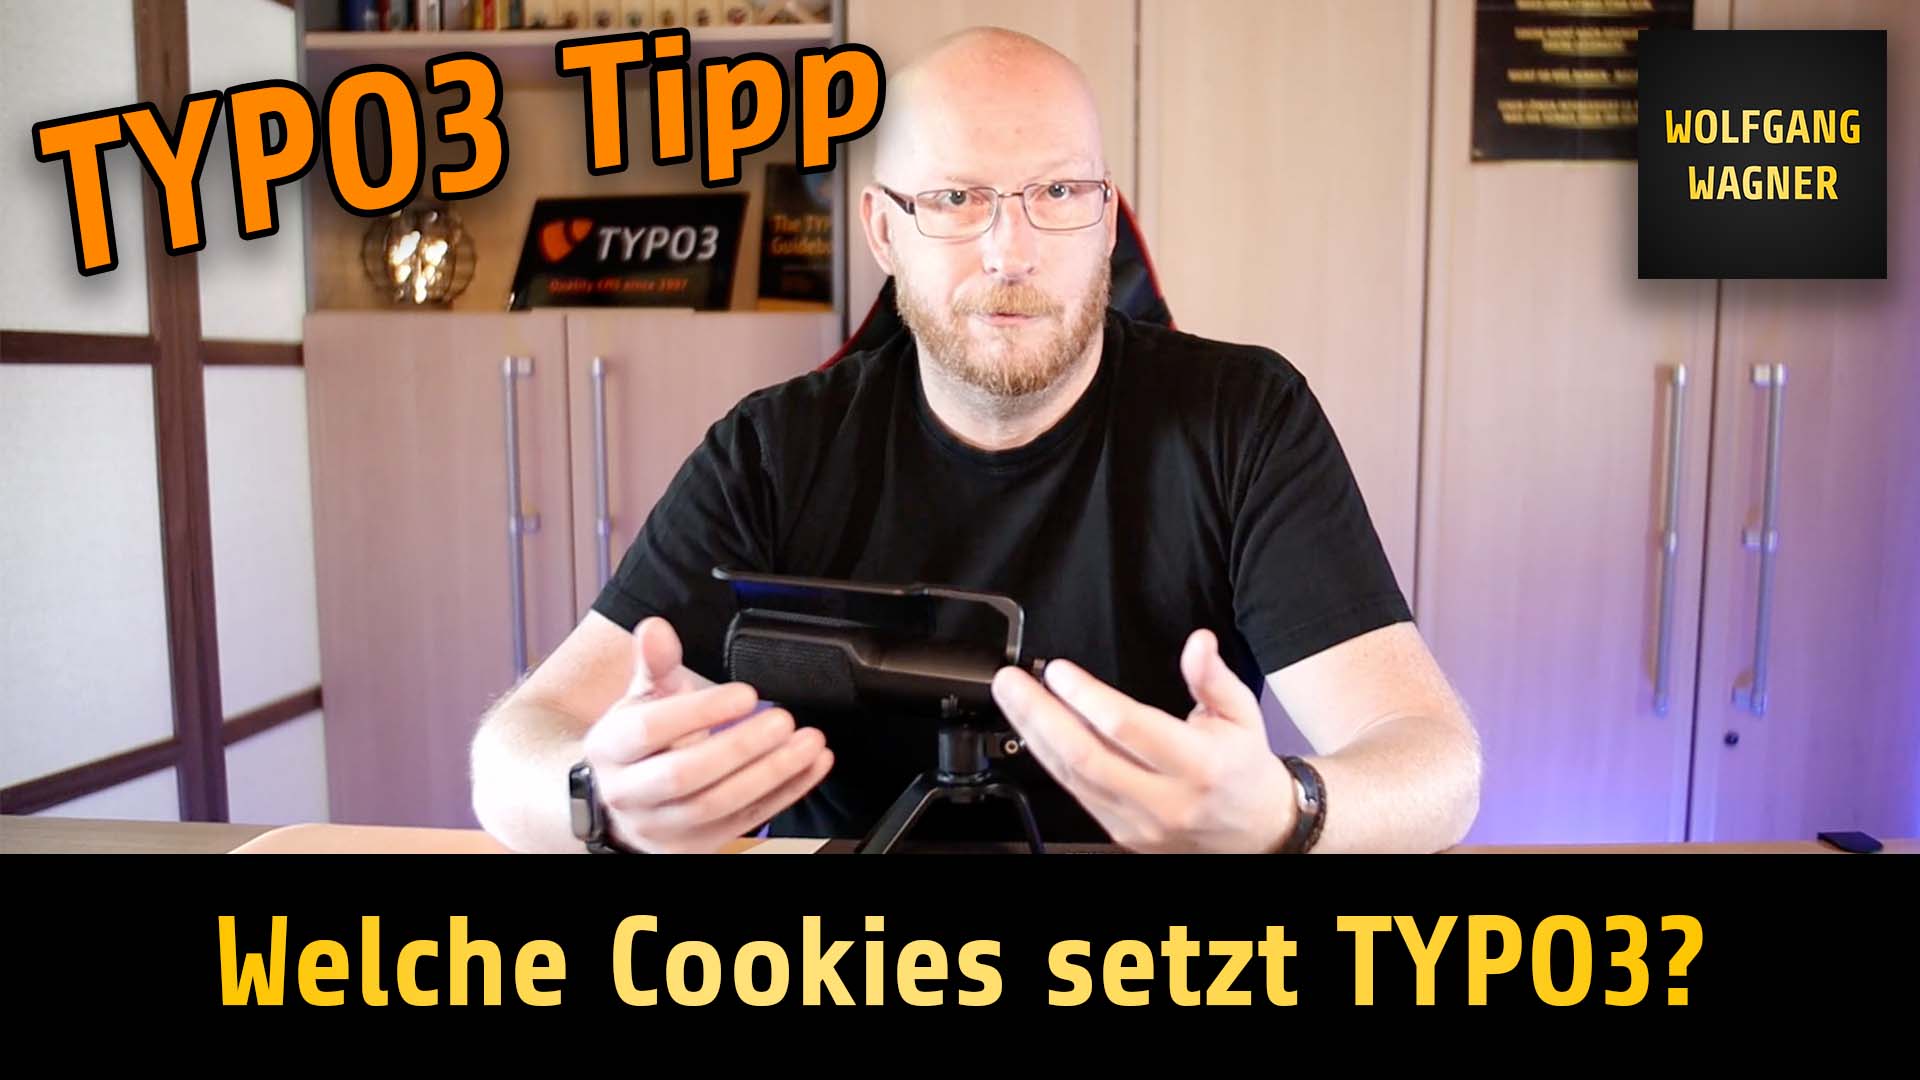 You are currently viewing Welche Cookies setzt TYPO3?